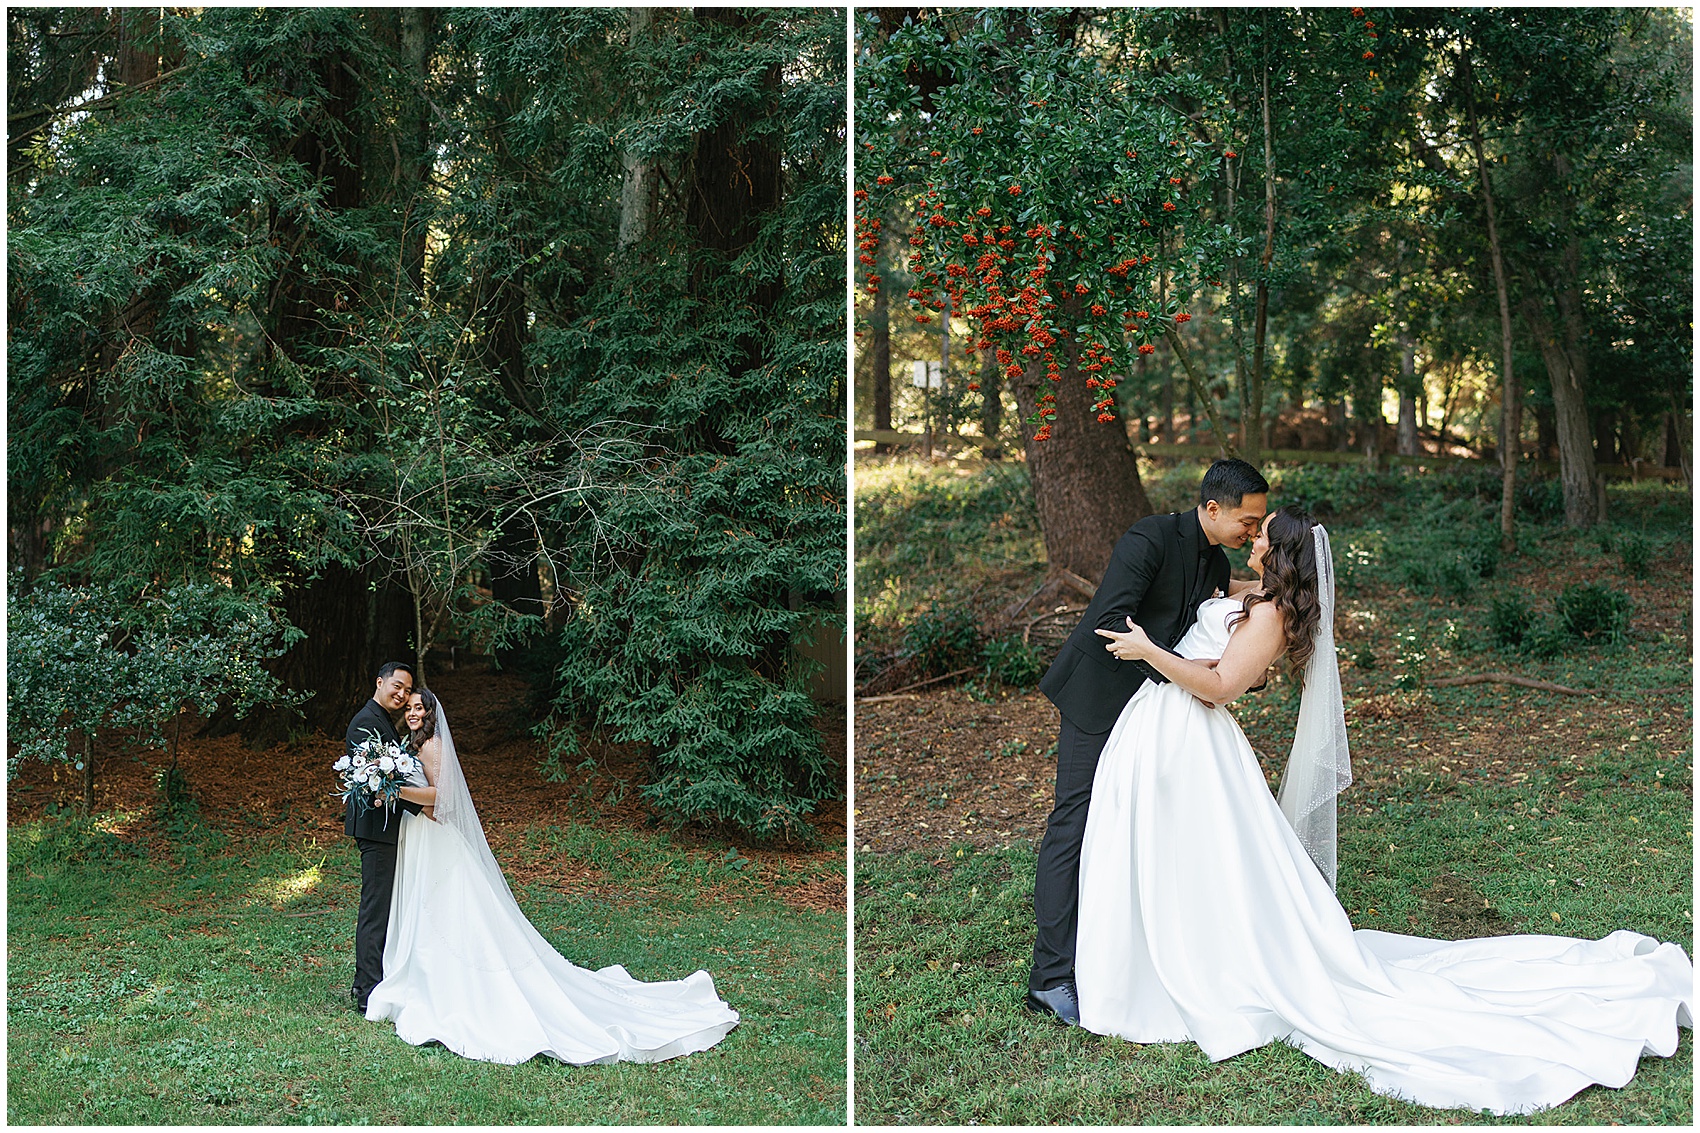 A groom dips his bride and leans in for a kiss in a forest meadow